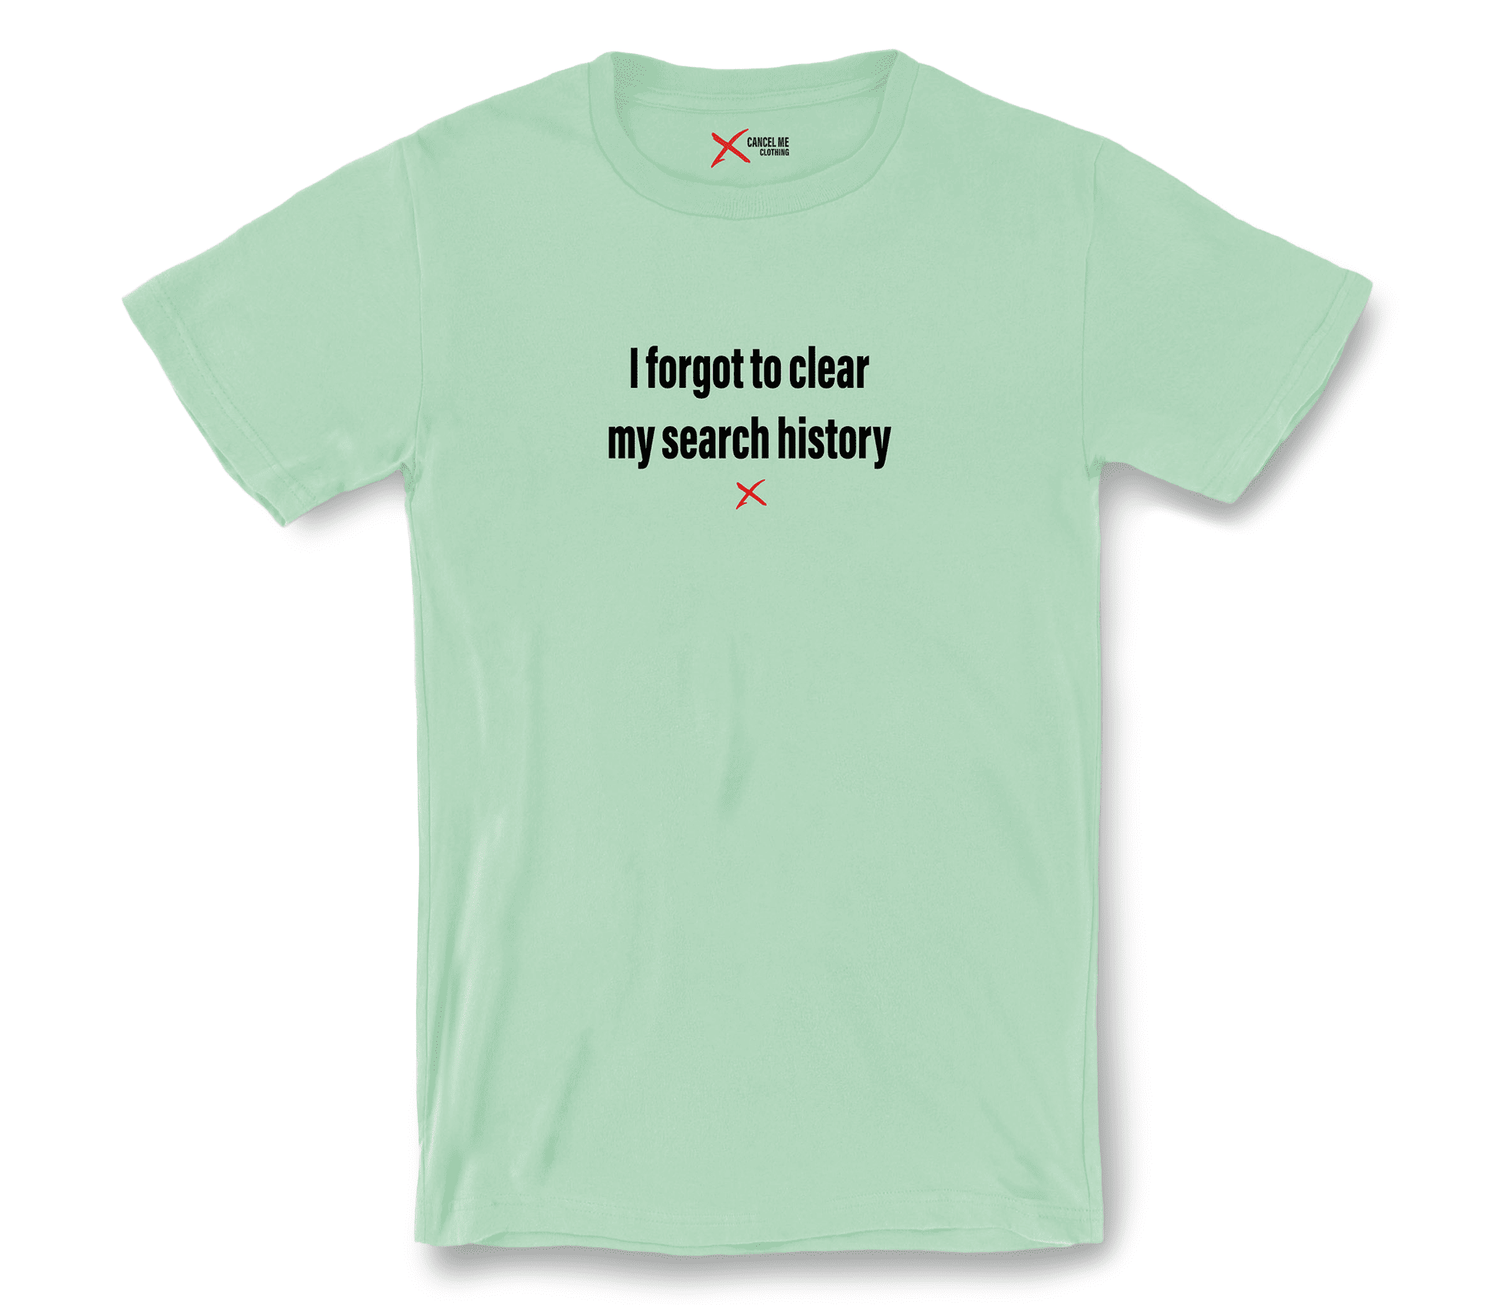 lp-social_media_2-shirt_7791818801322_i-forgot-to-clear-my-search-history-shirt_Heather Mint.png